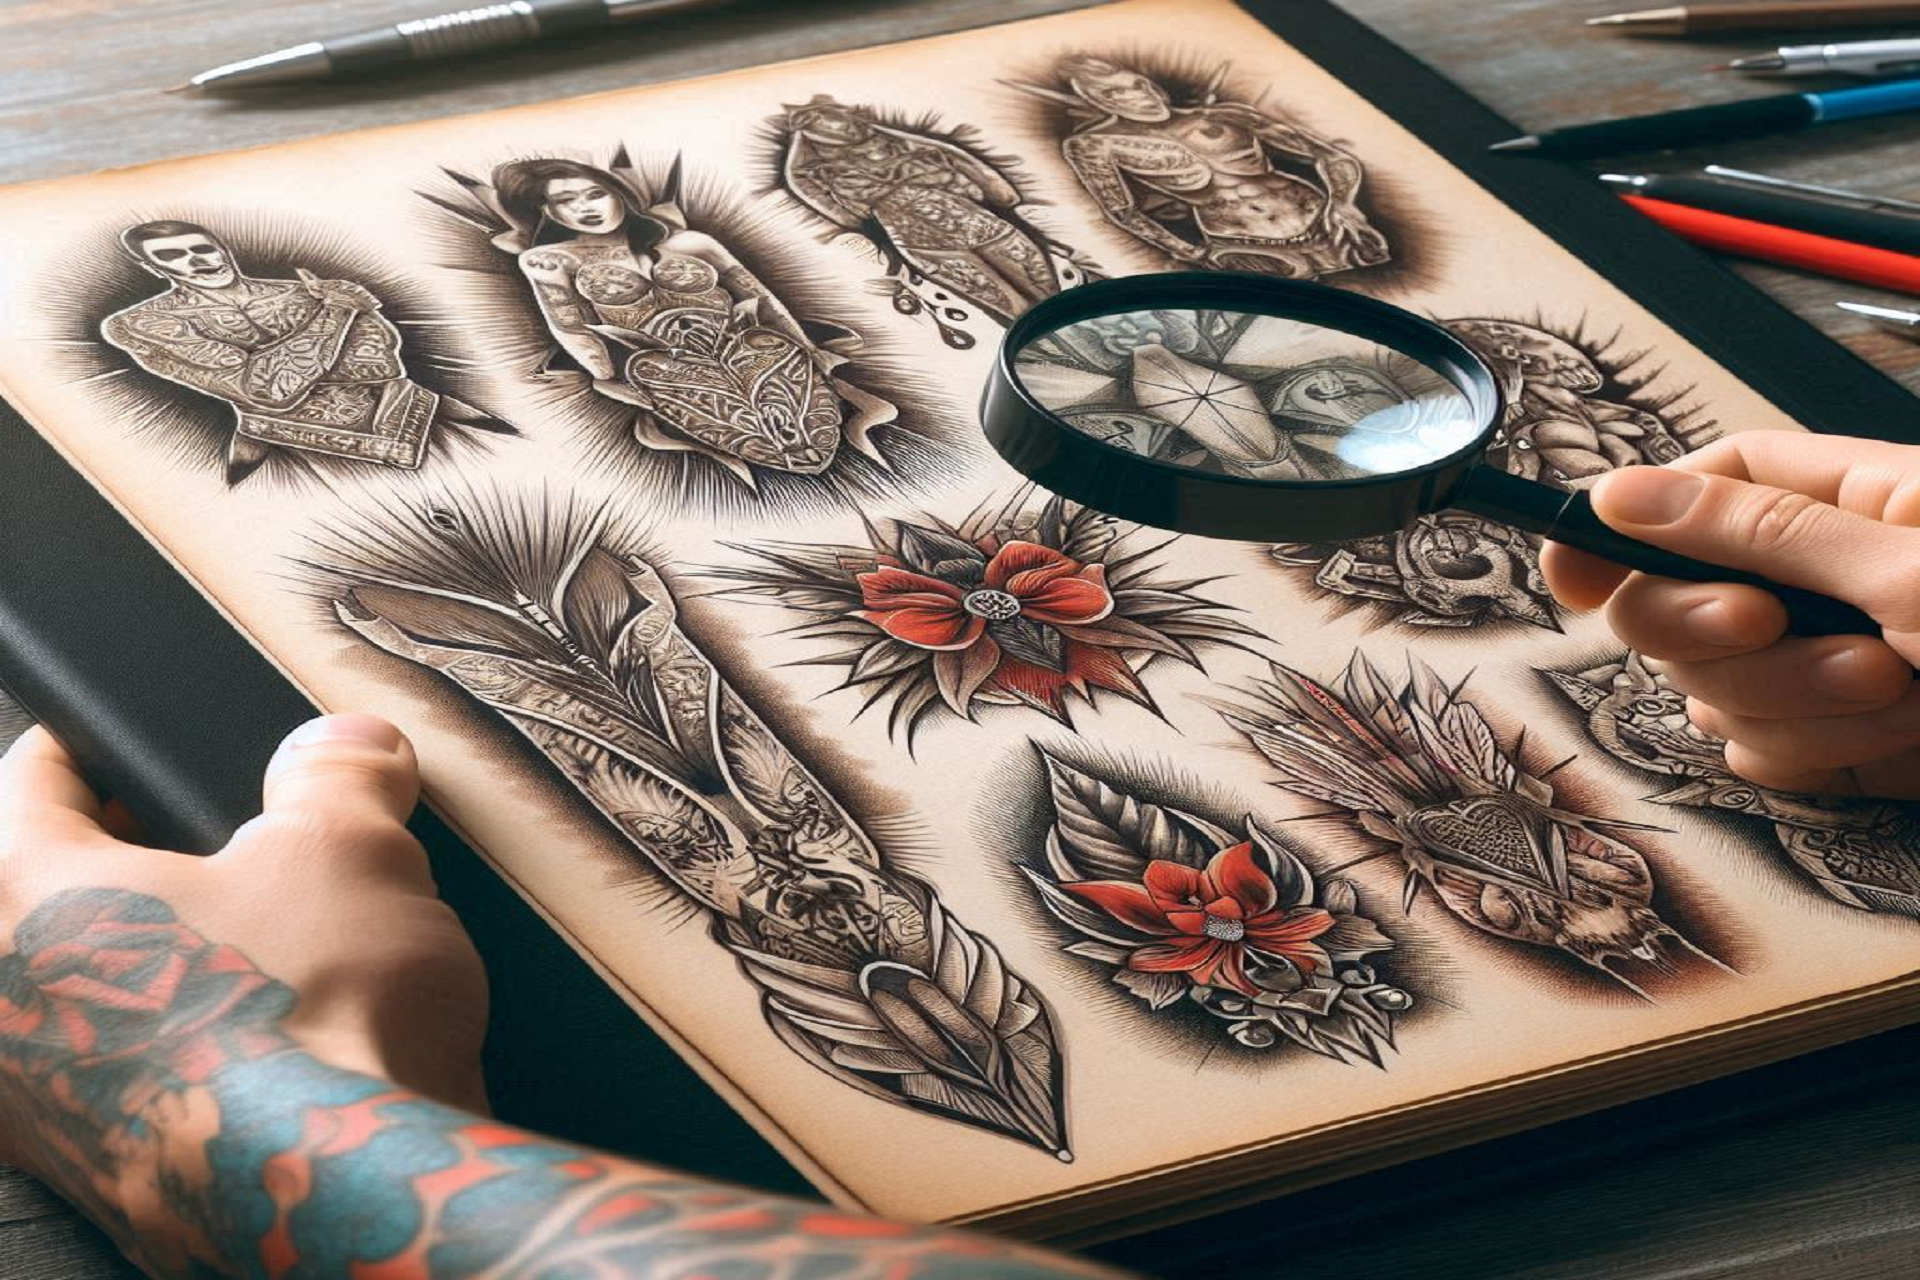 How to Find a Good Tattoo Artist